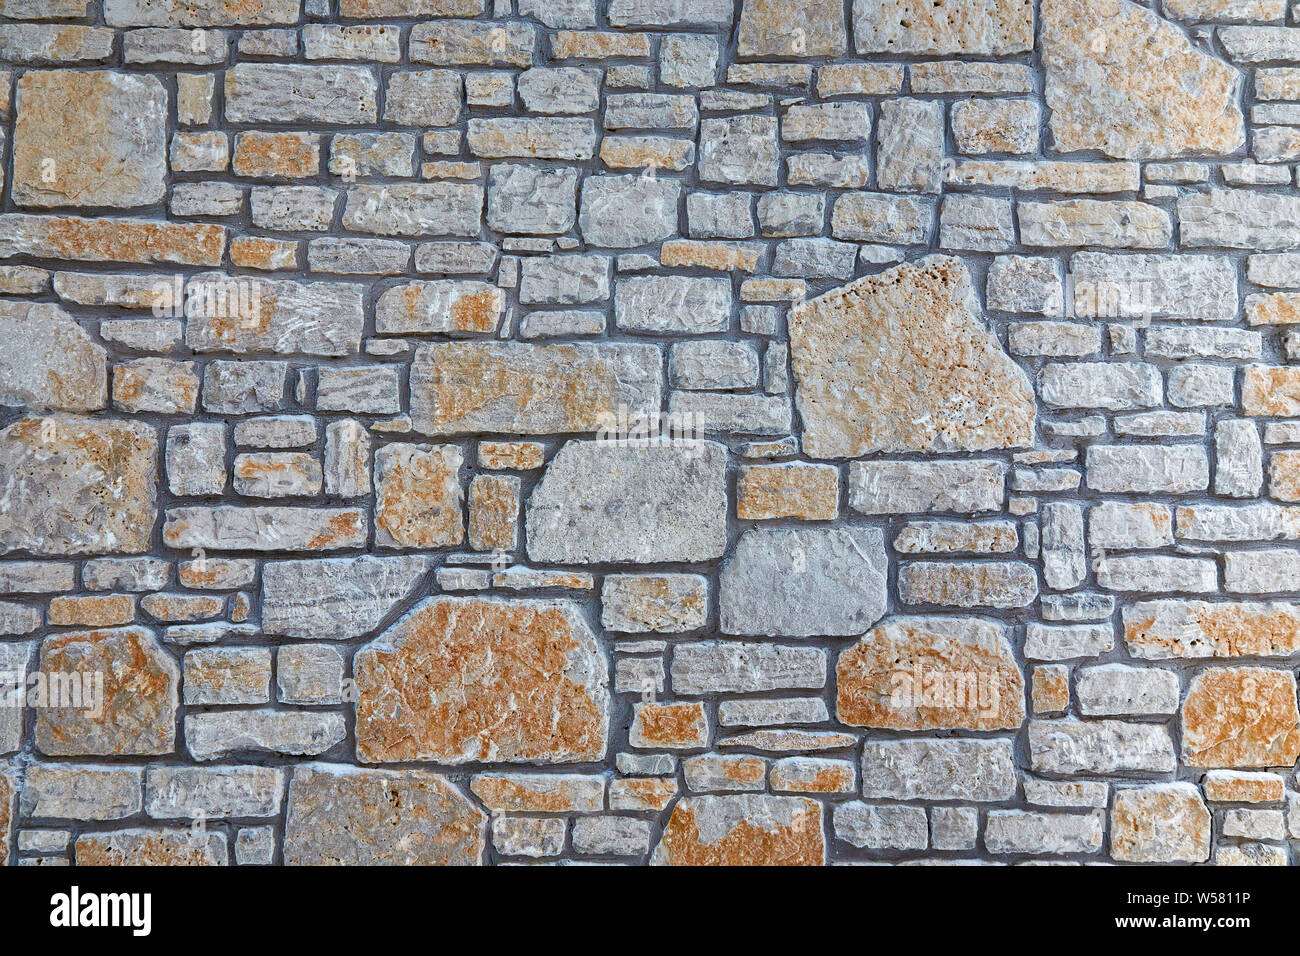 https://c8.alamy.com/comp/W5811P/seamless-wall-texture-with-gray-stones-in-form-of-rectangle-W5811P.jpg